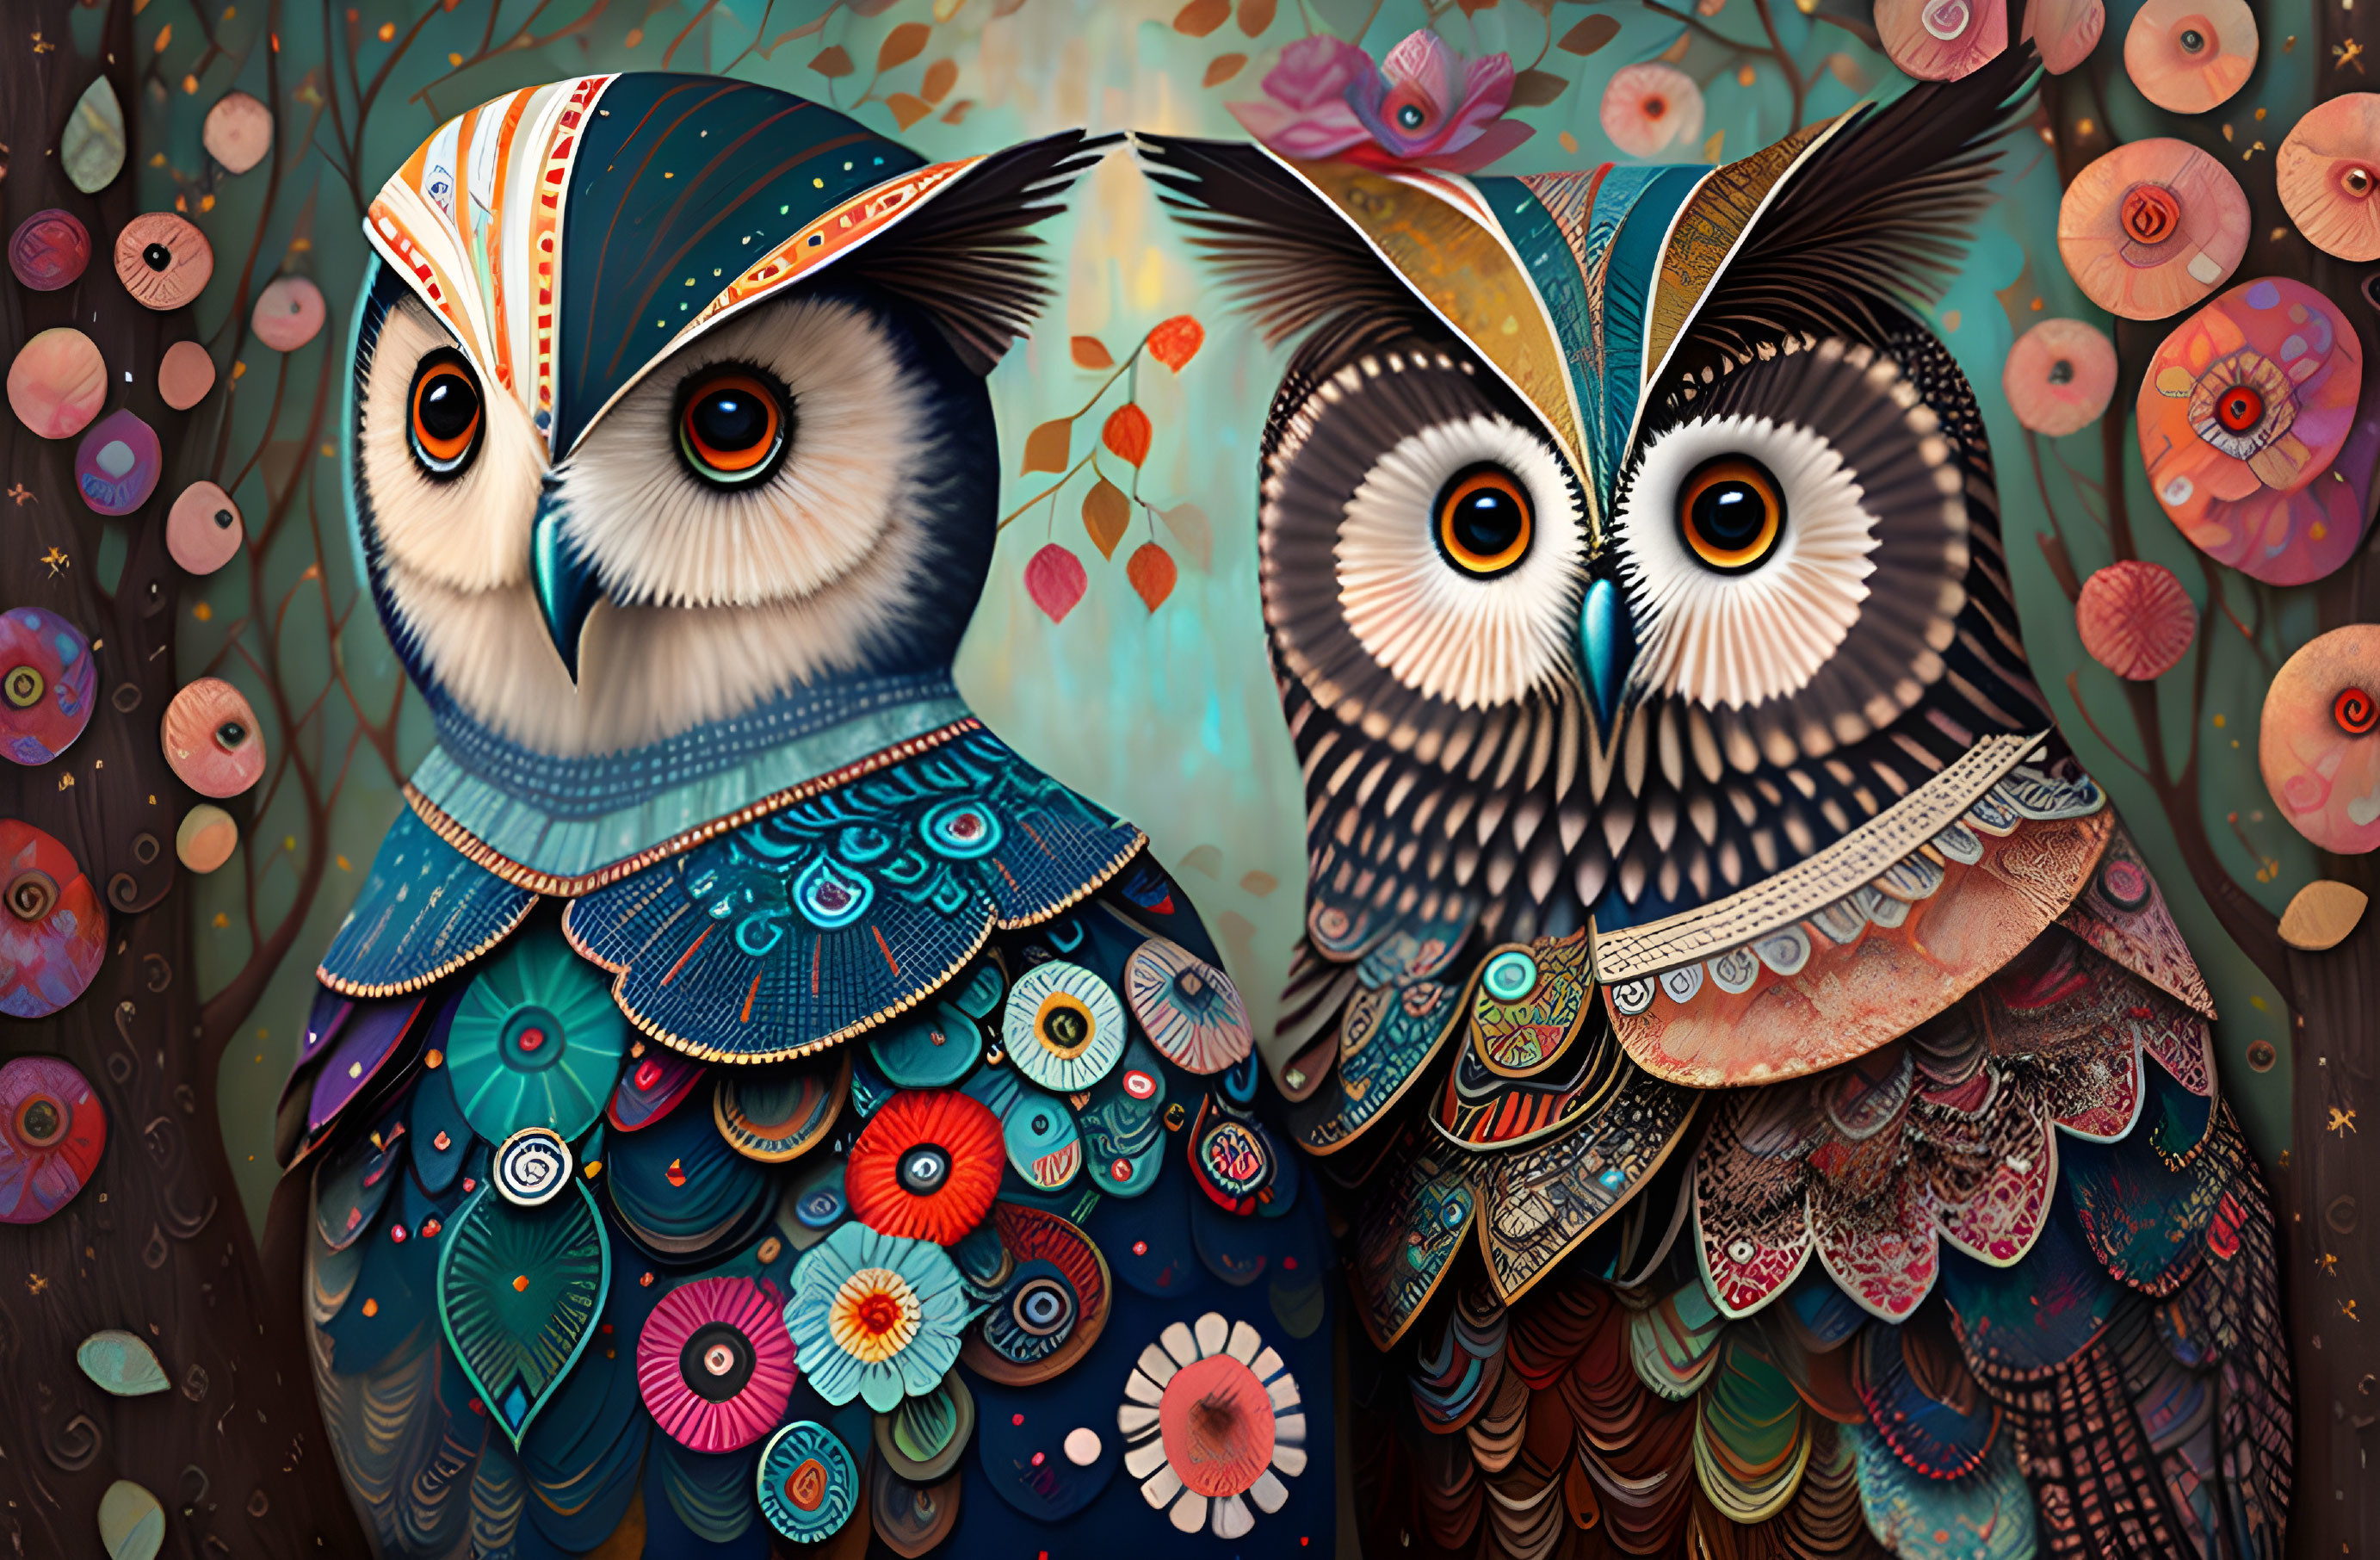 Illustrated Owls with Intricate Patterns and Floating Circles